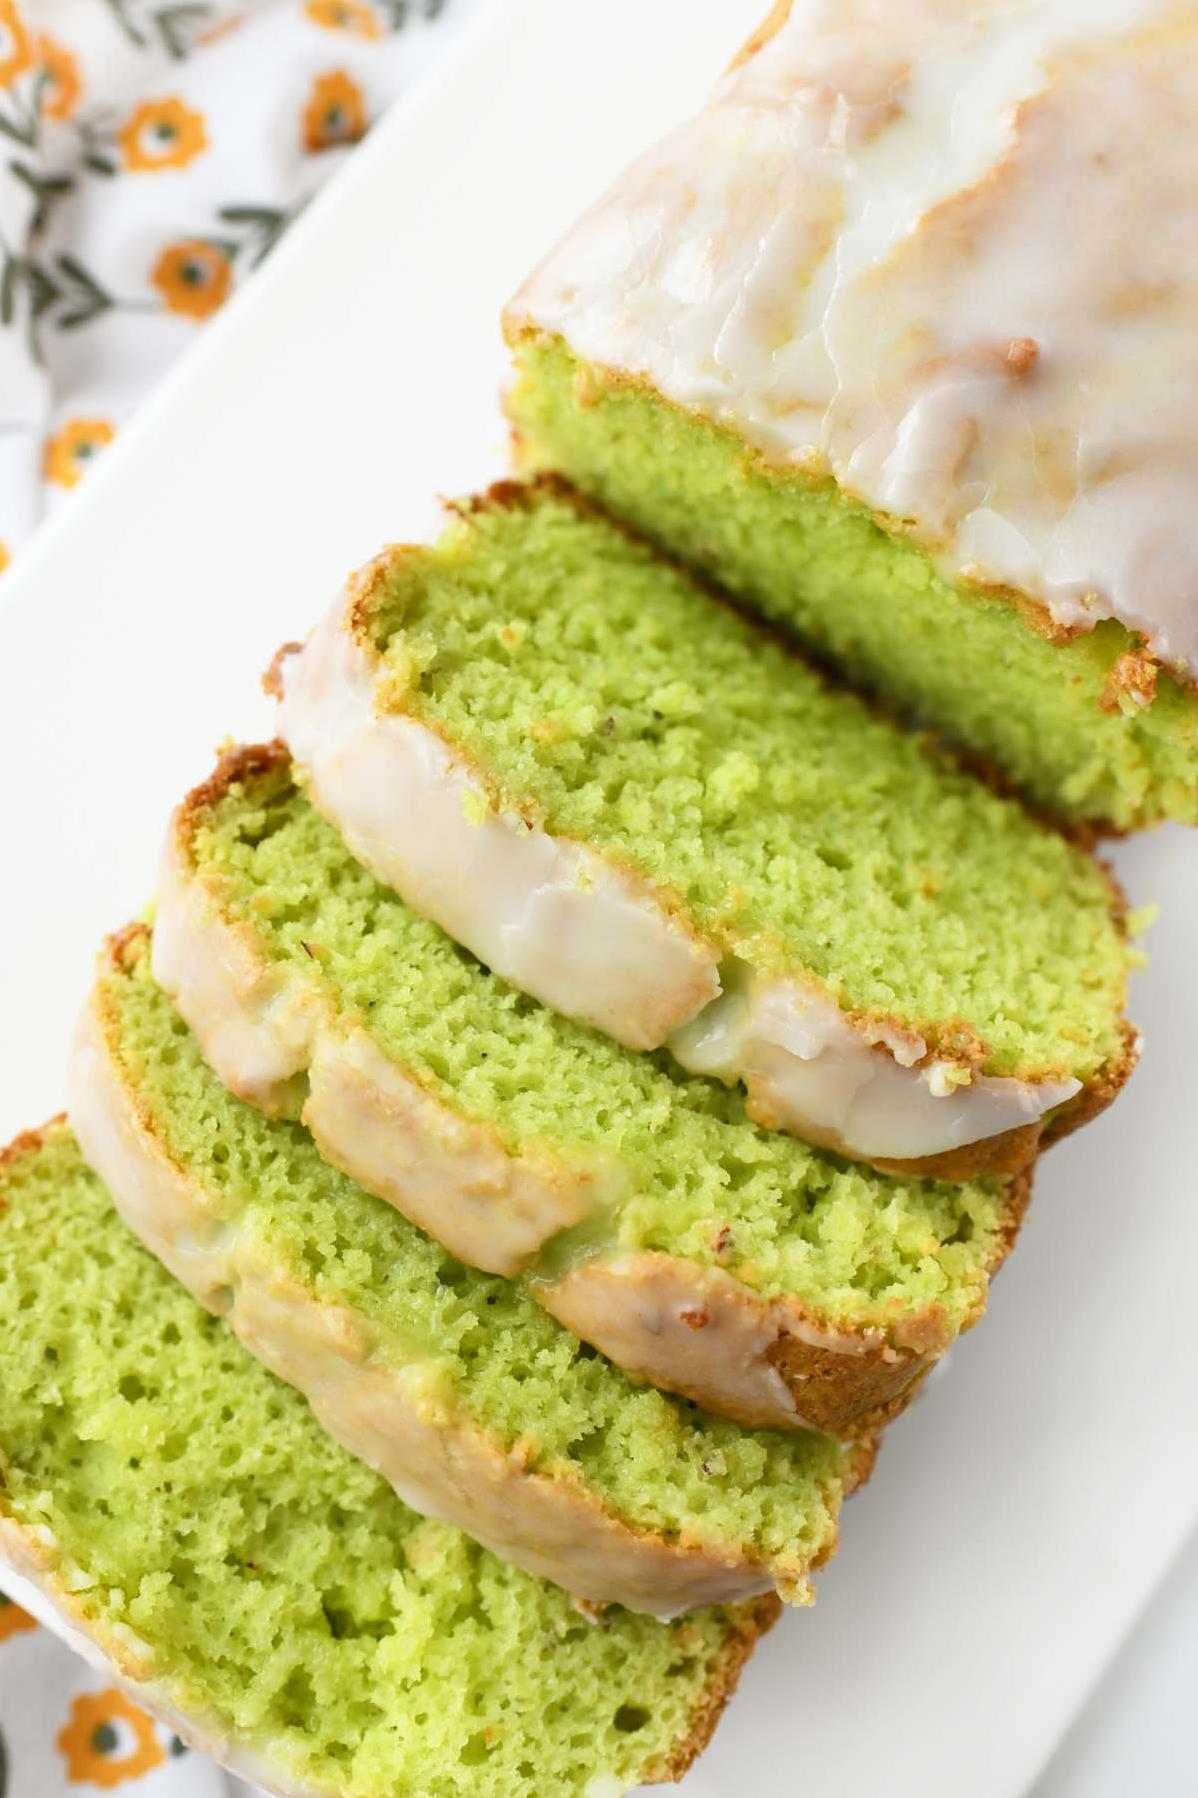  Pistachio lovers, this one's for you!